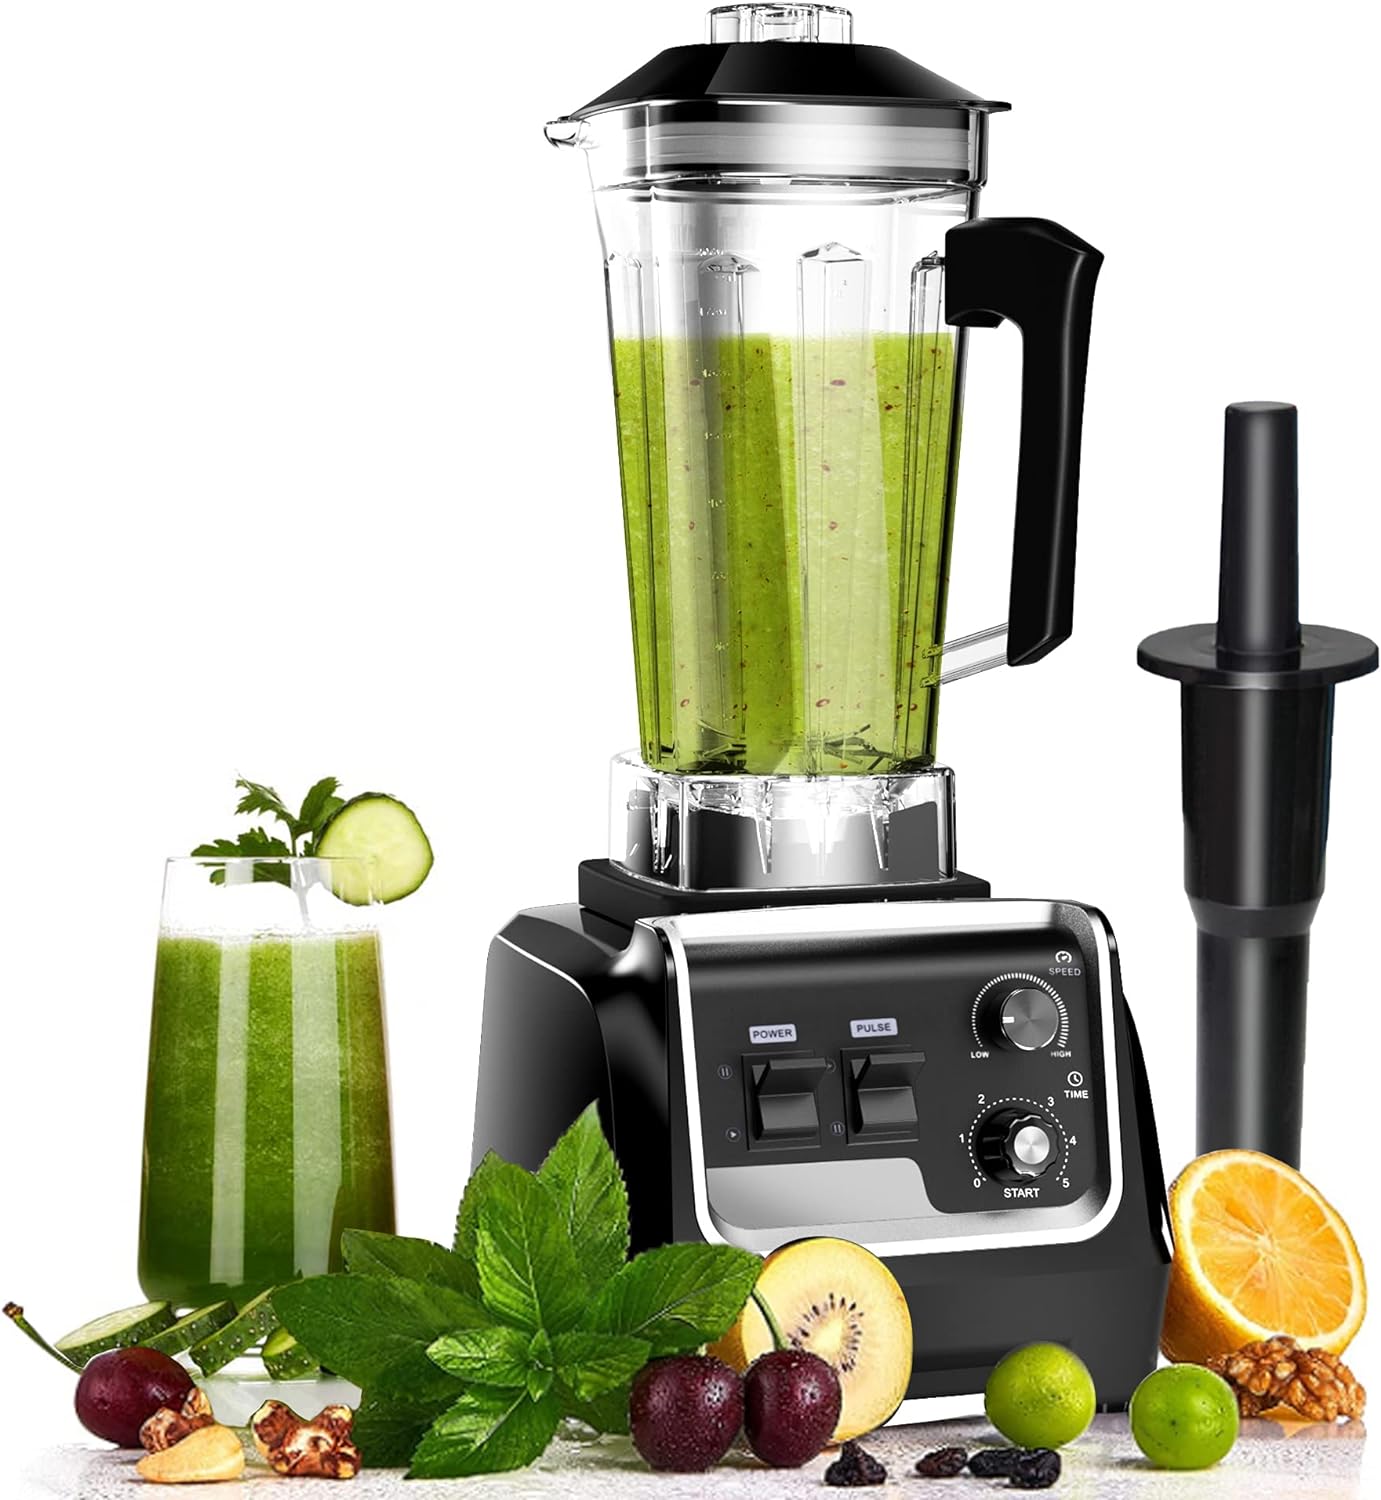 Blenders for Kitchen, Professional Smoothies Blender with 68oz Container, 2200W High Power Countertop Blender for Frozen Fruit Crushing Ice, Shakes